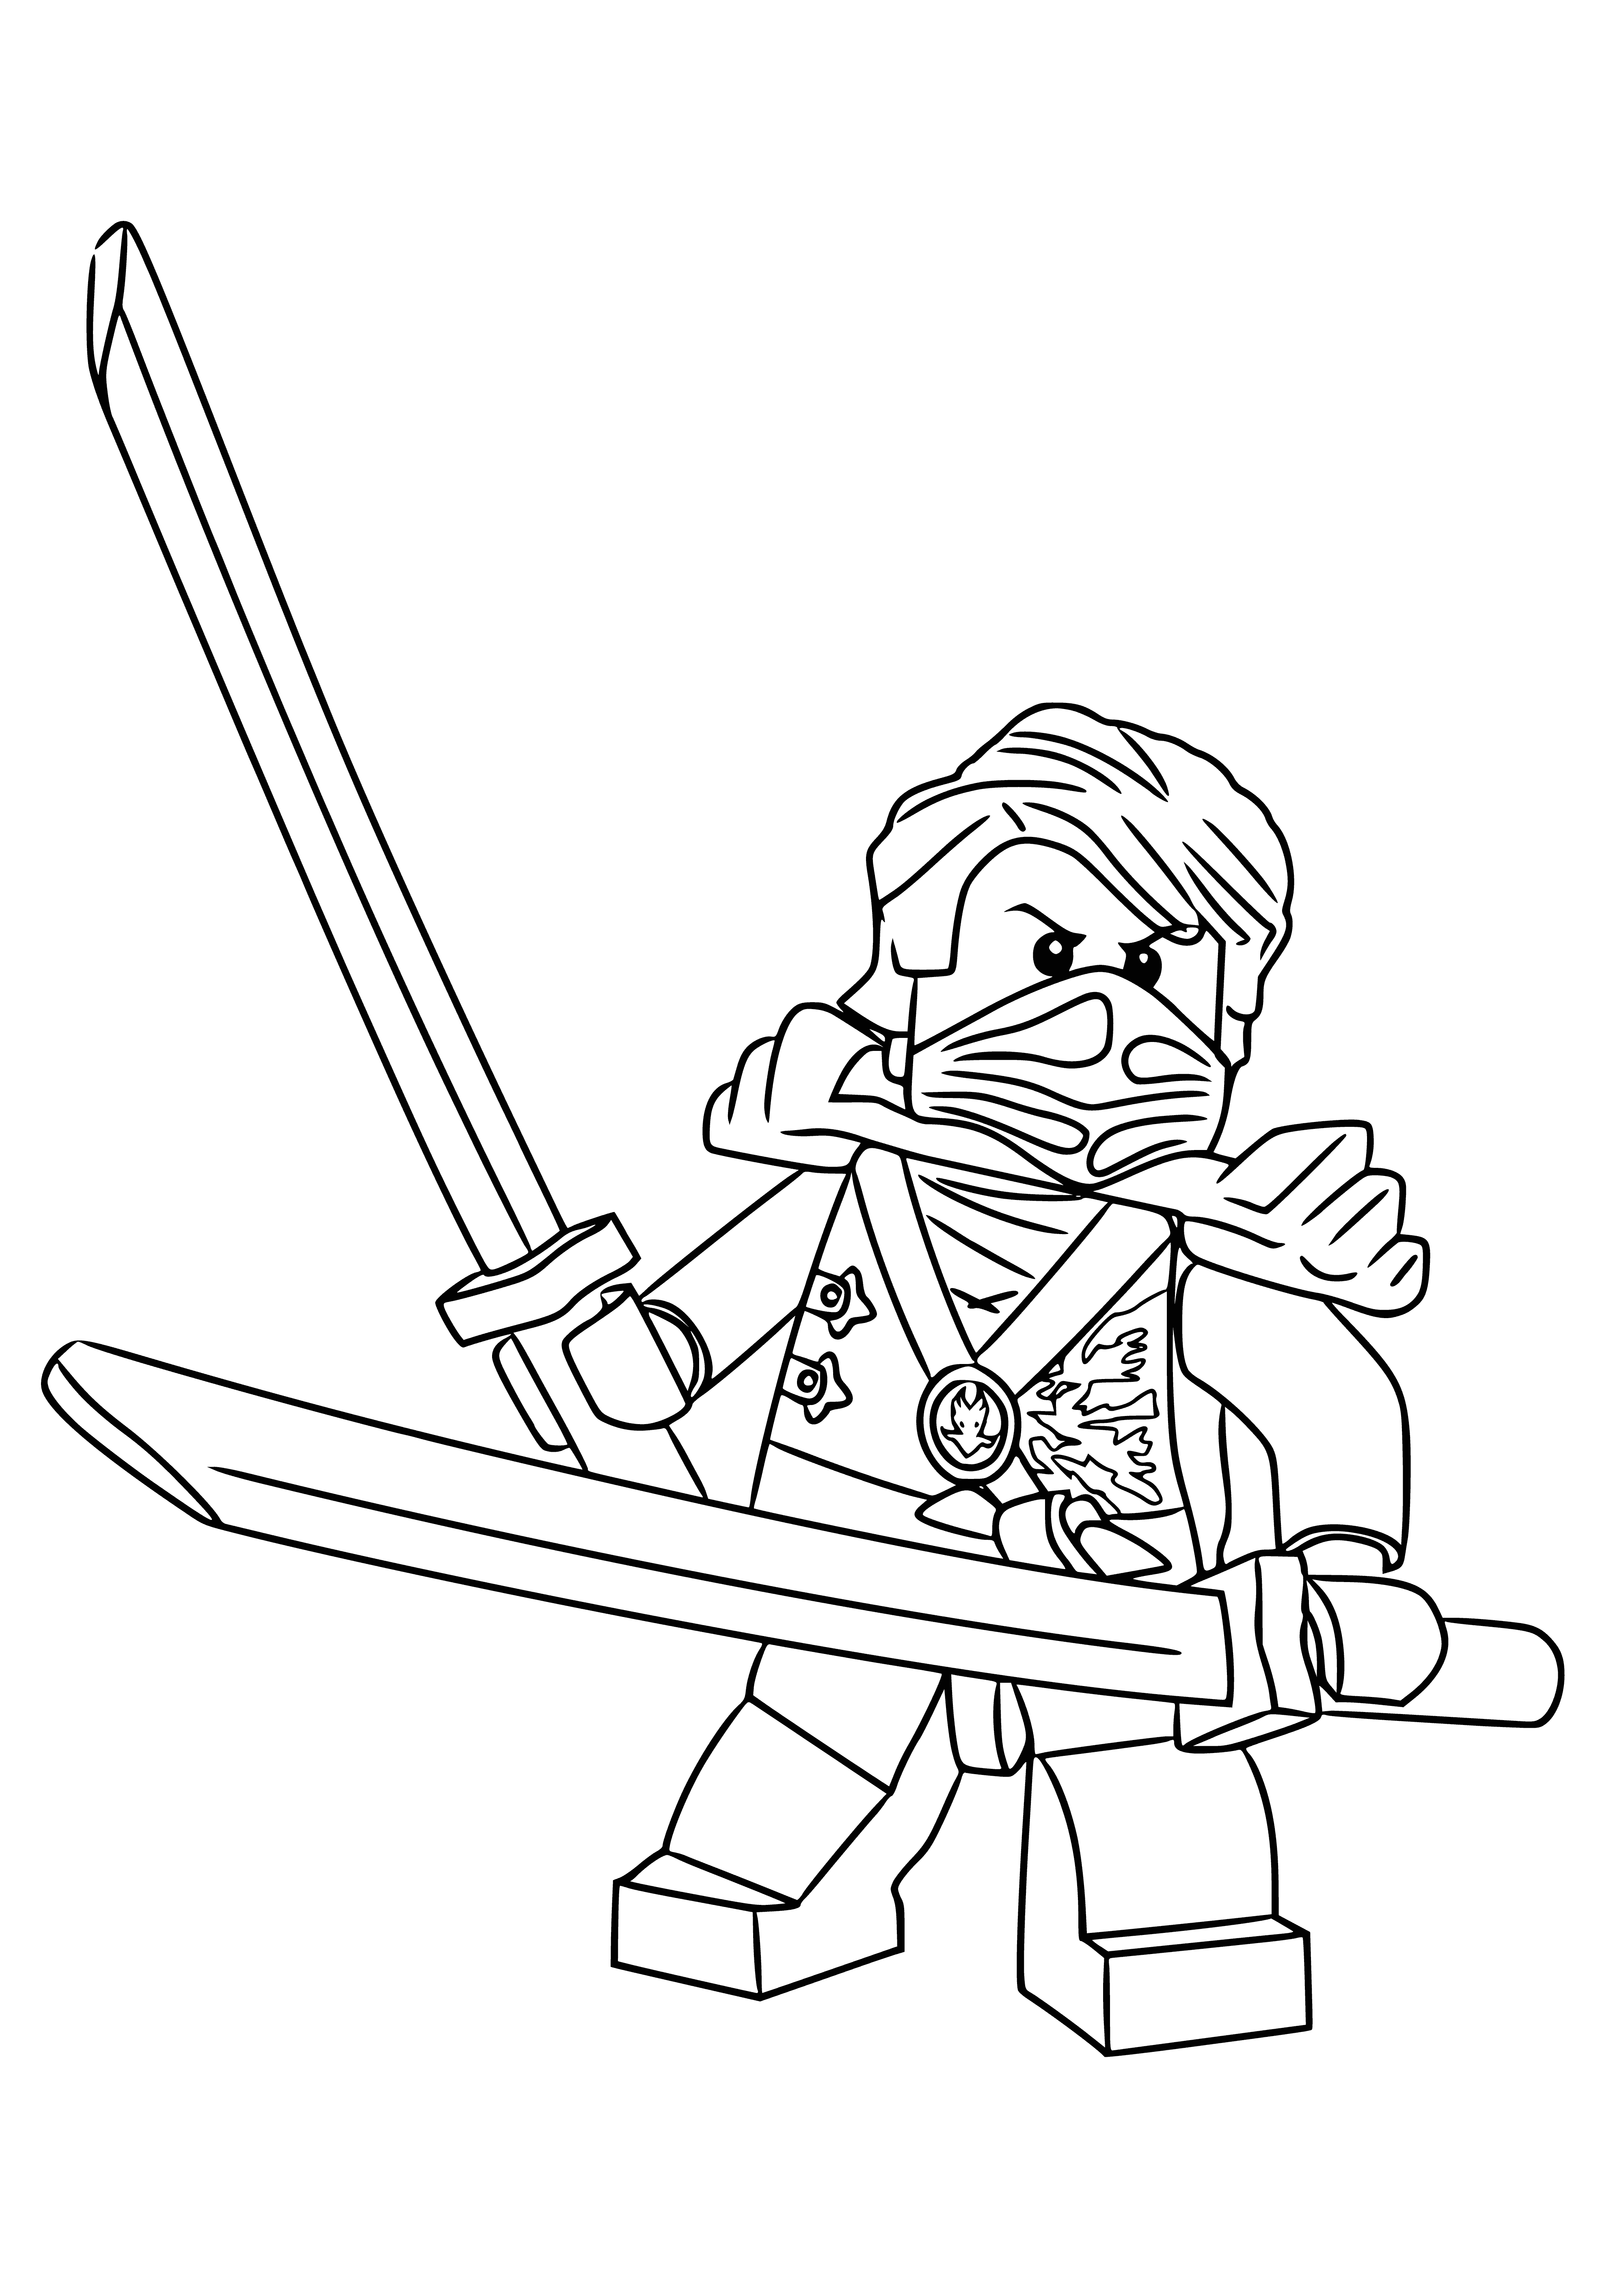 coloring page: LEGO Ninjago set with 4 ninja figures, each with a different color sword and outfit. One sword features a detachable chainsaw blade.